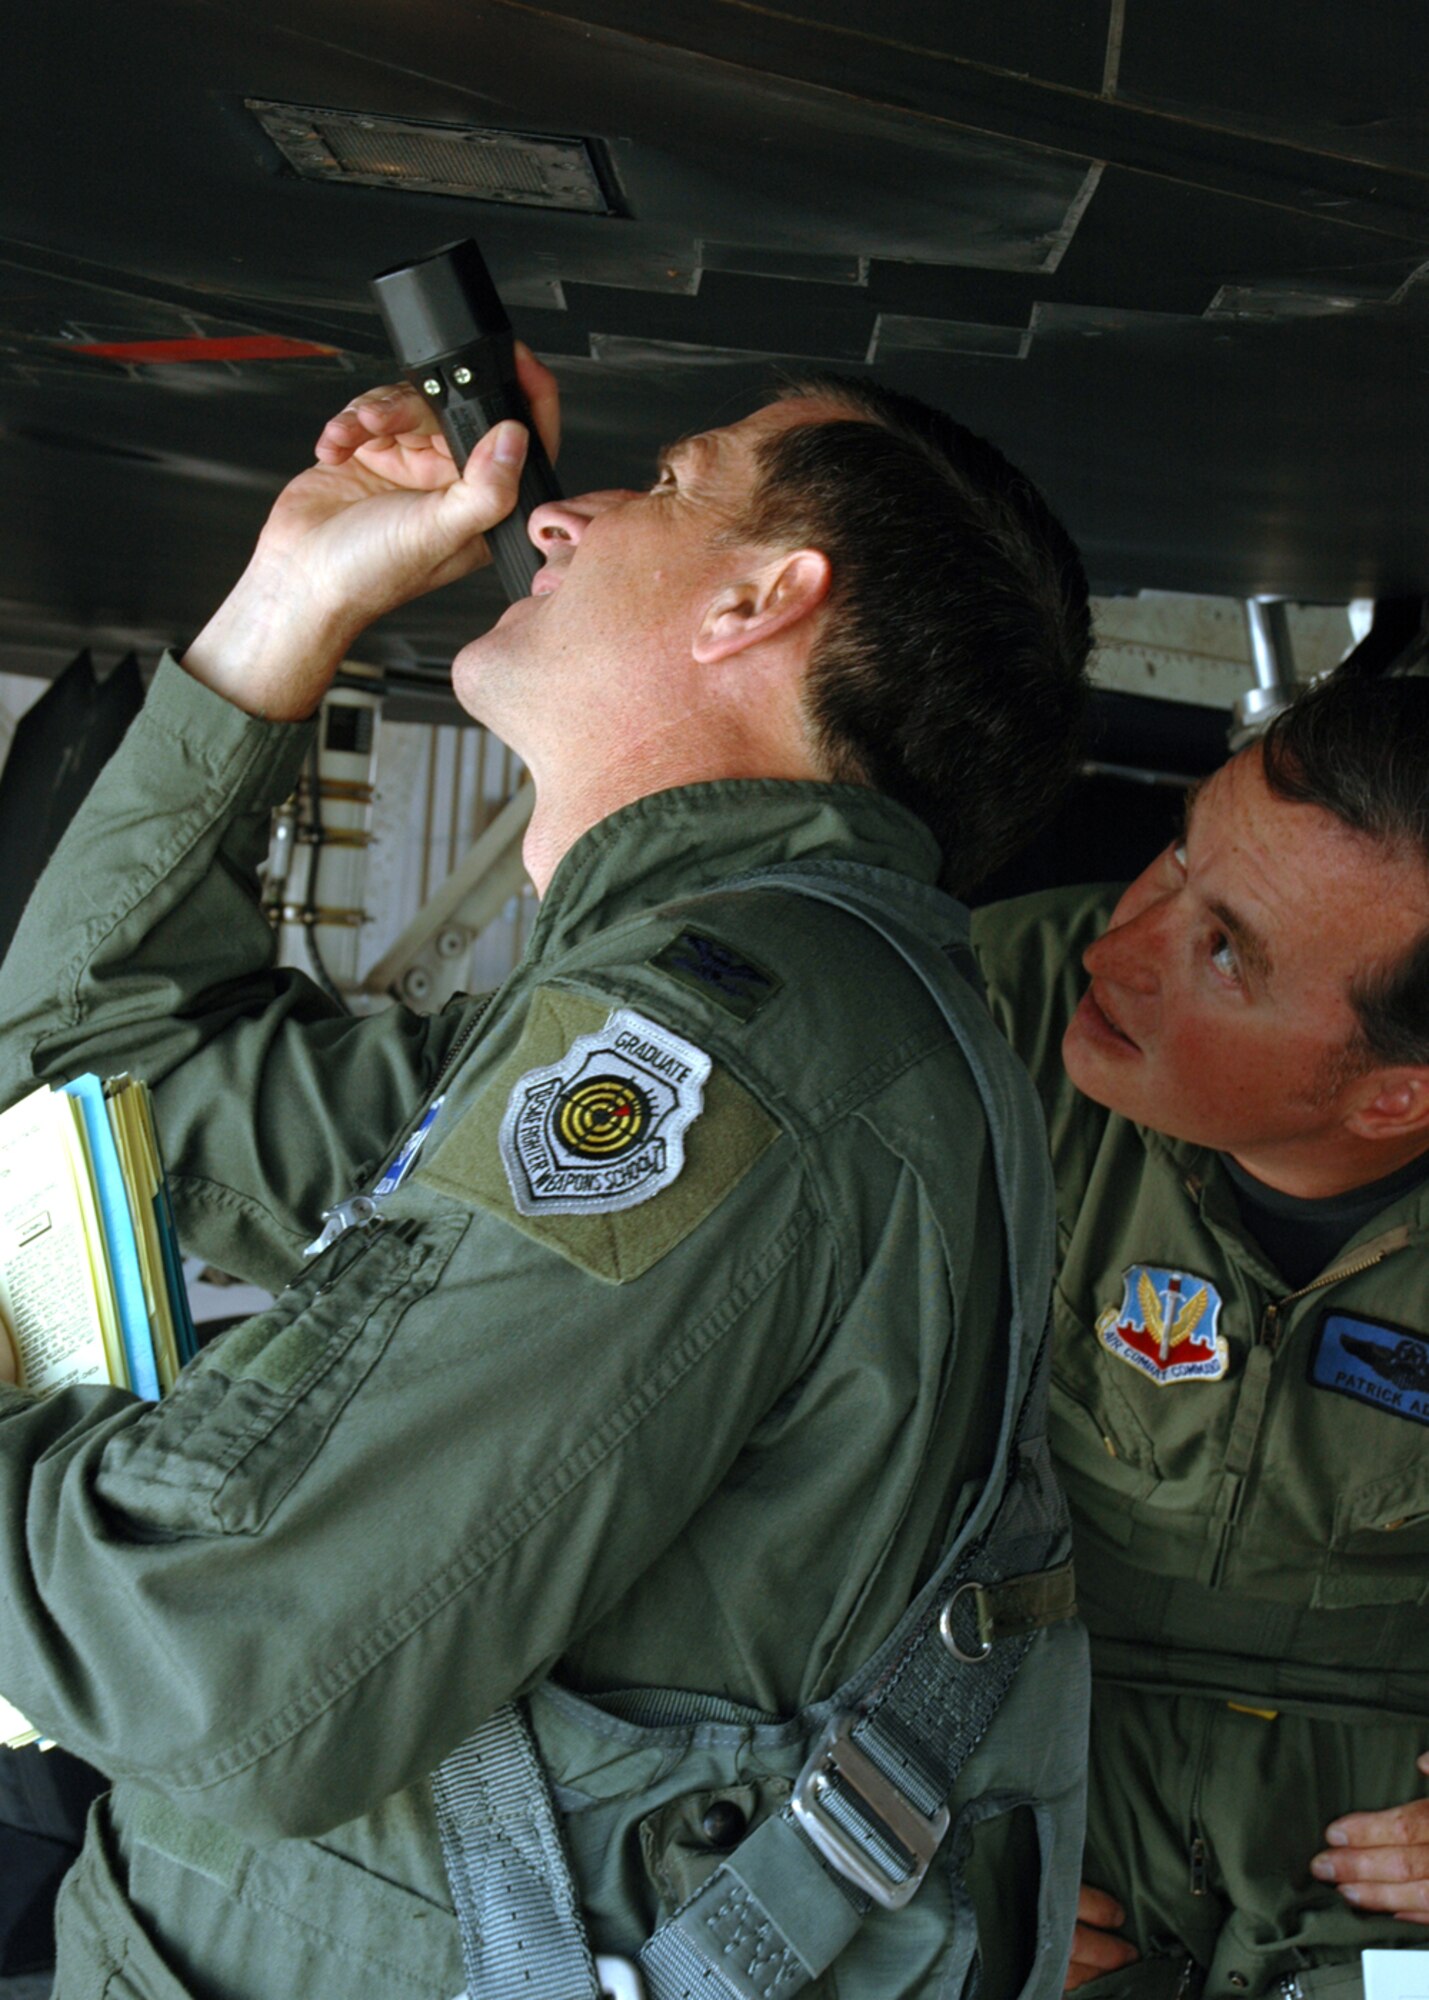 Colonel David Goldfein, Commander, 49th Fighter Wing, and Major Patrick Adams, 7th Fighter Squadron, check the F-117's pass bottle before flight on September 14, 2006, Holloman Air Force Base, New Mexico. The pass bottle is used to start the F- 117's auxiliary power unit. US Air Force photo by Airman Jamal Sutter 